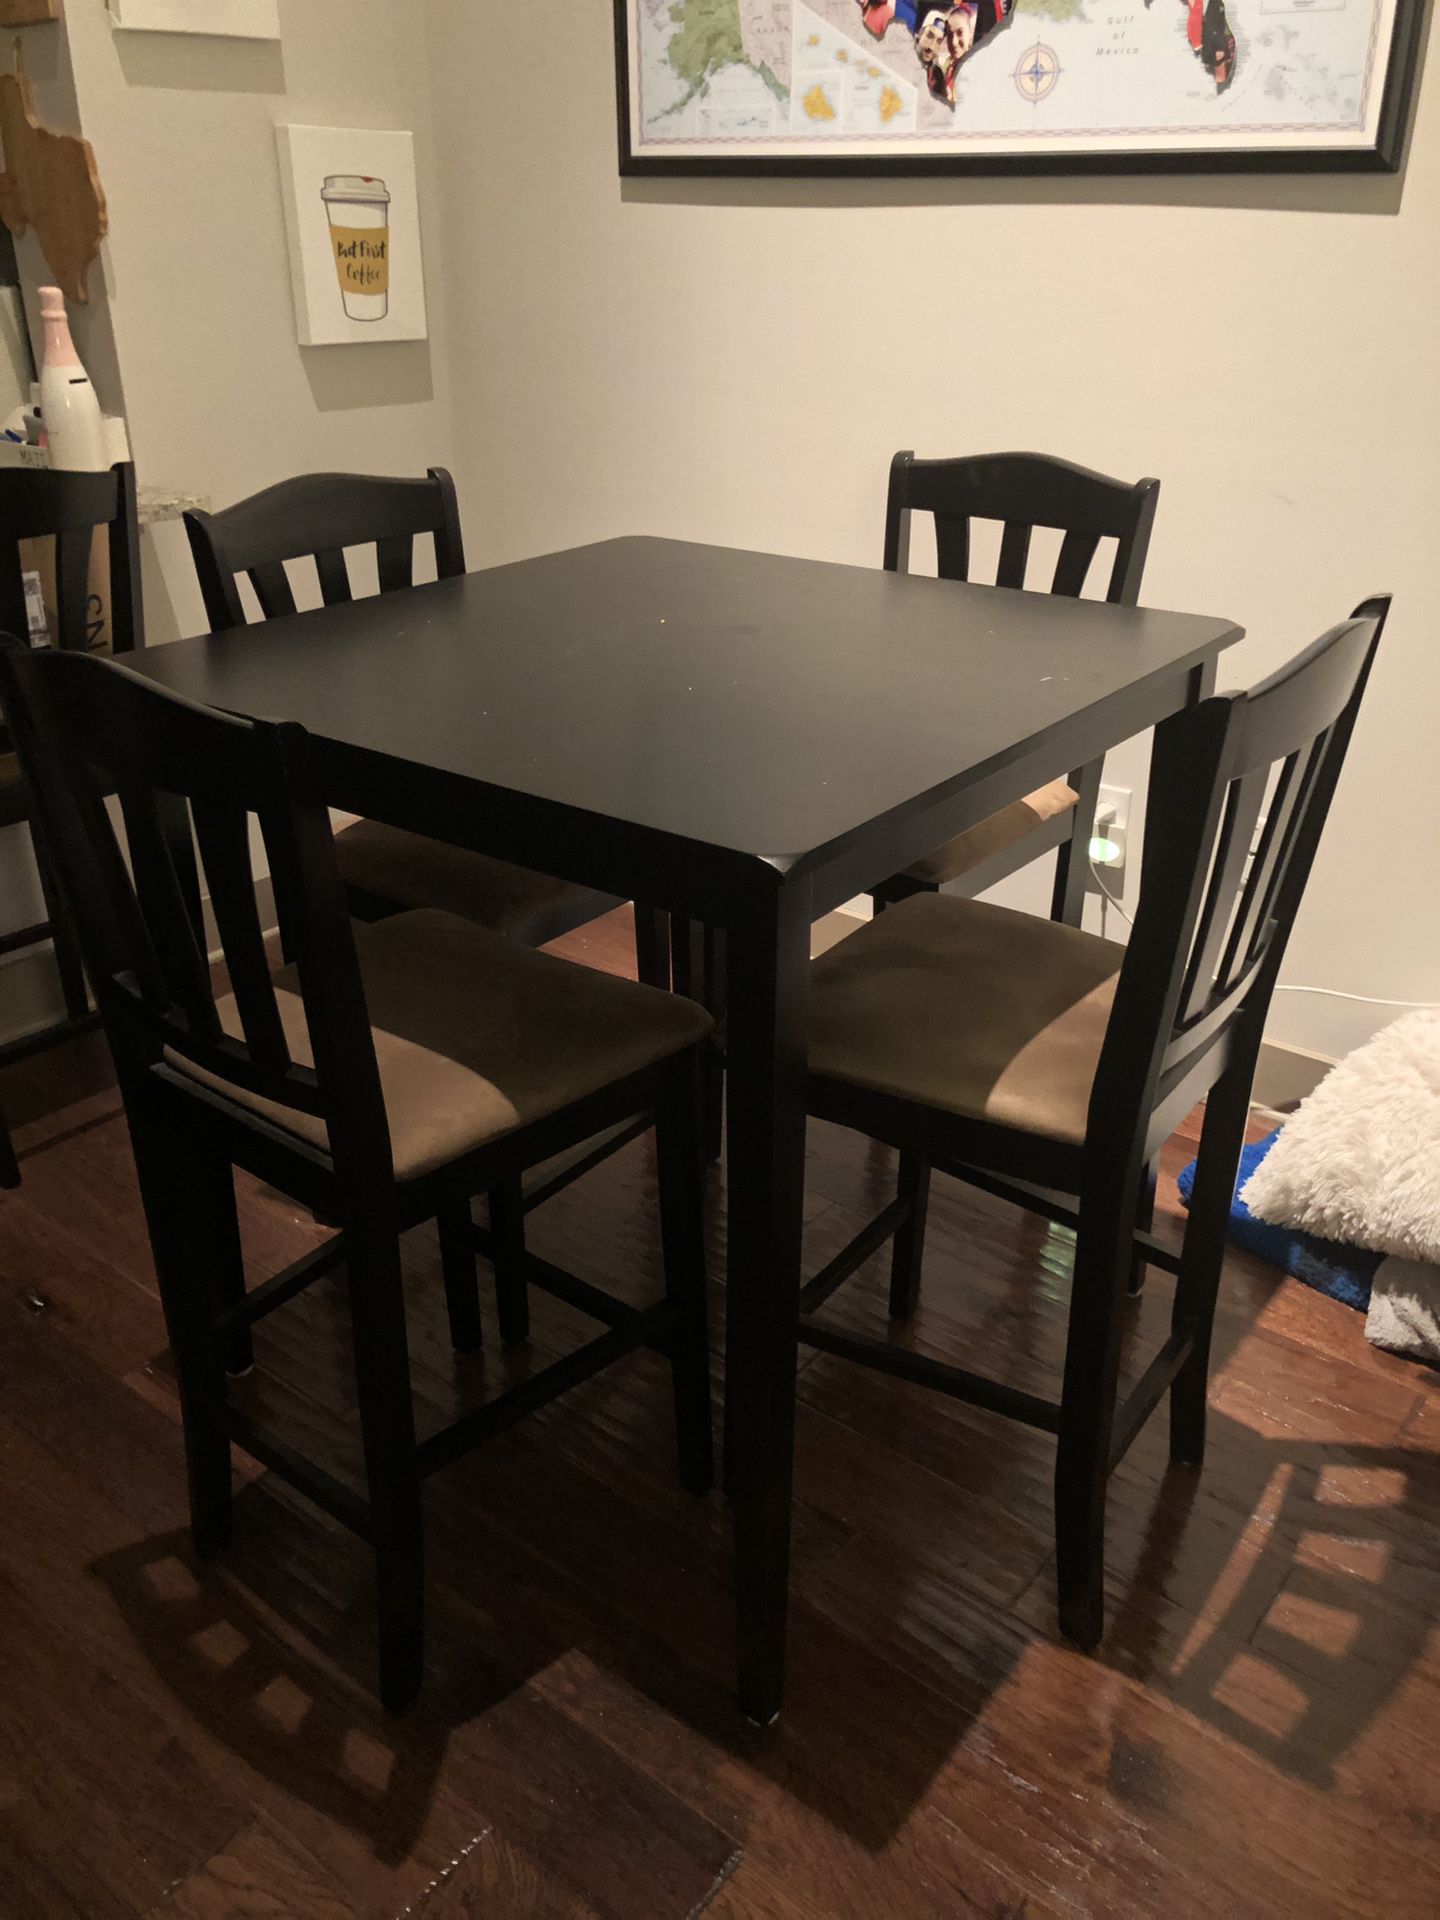 Black Wooden Bar Style Kitchen Table & 4 Chairs - 48”x48”